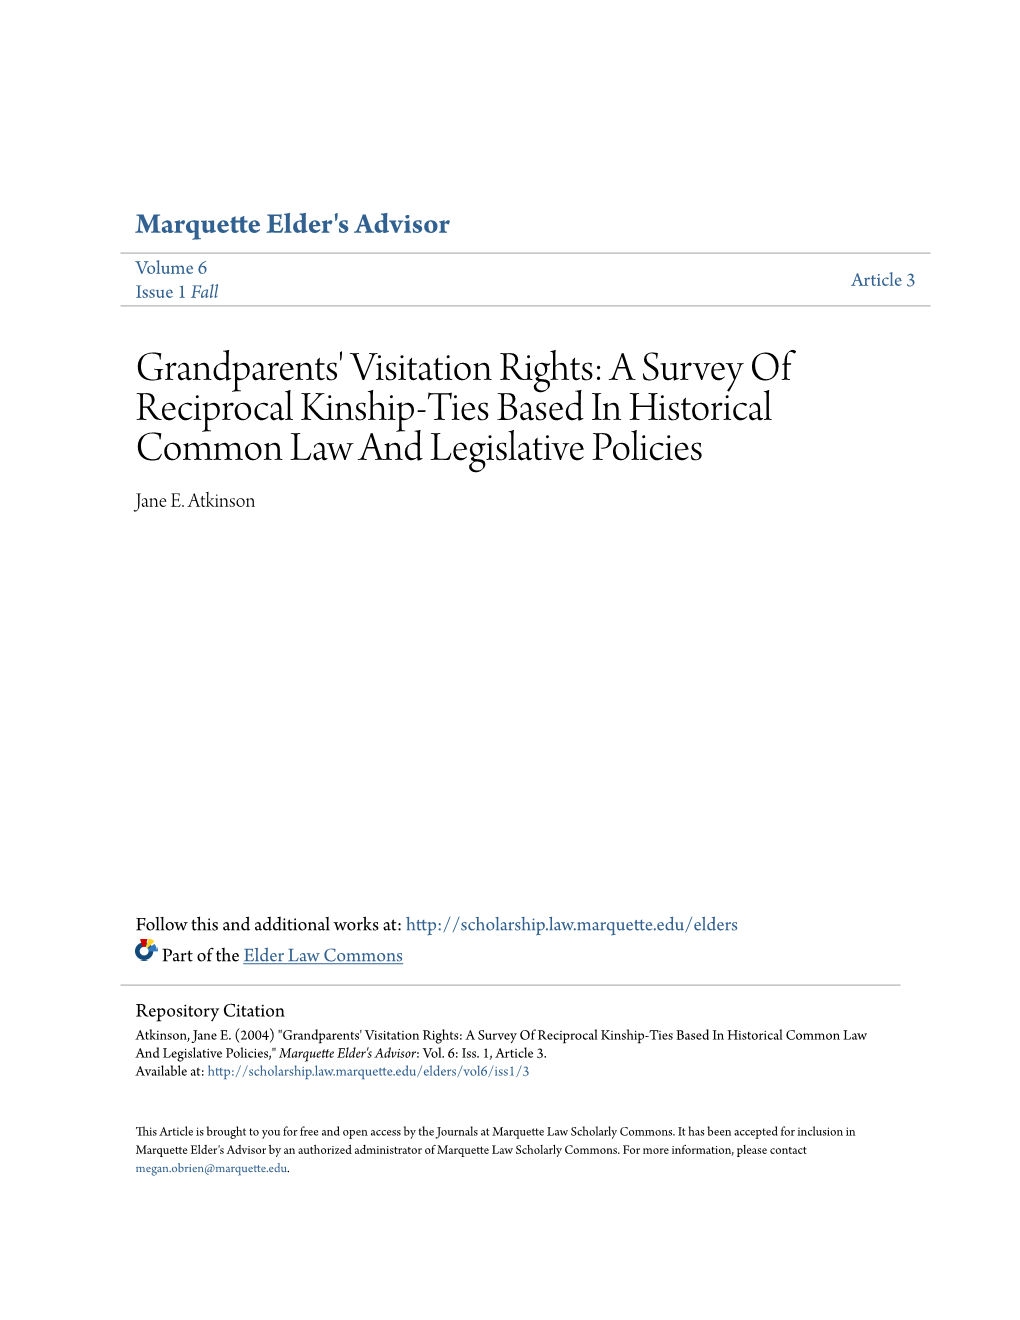 Grandparents' Visitation Rights: a Survey of Reciprocal Kinship-Ties Based in Historical Common Law and Legislative Policies Jane E